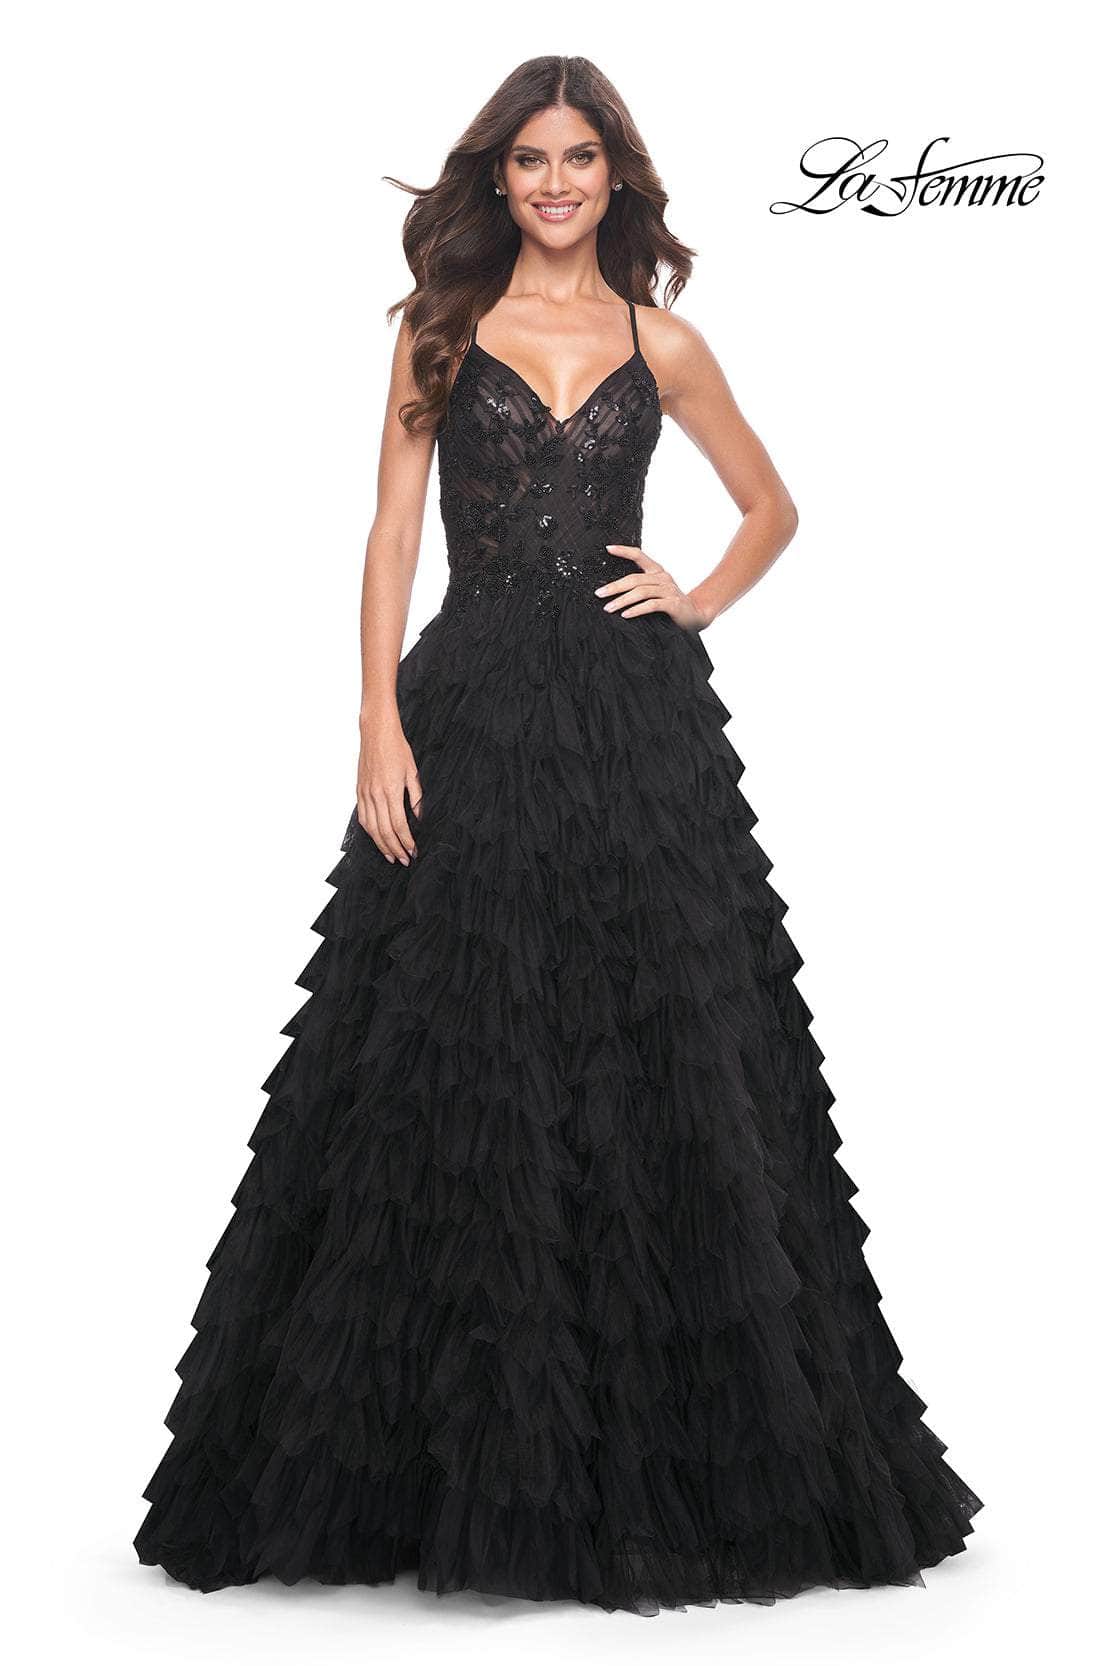 Image of La Femme 32108 - Ruffle Detailed A-Line Prom Gown